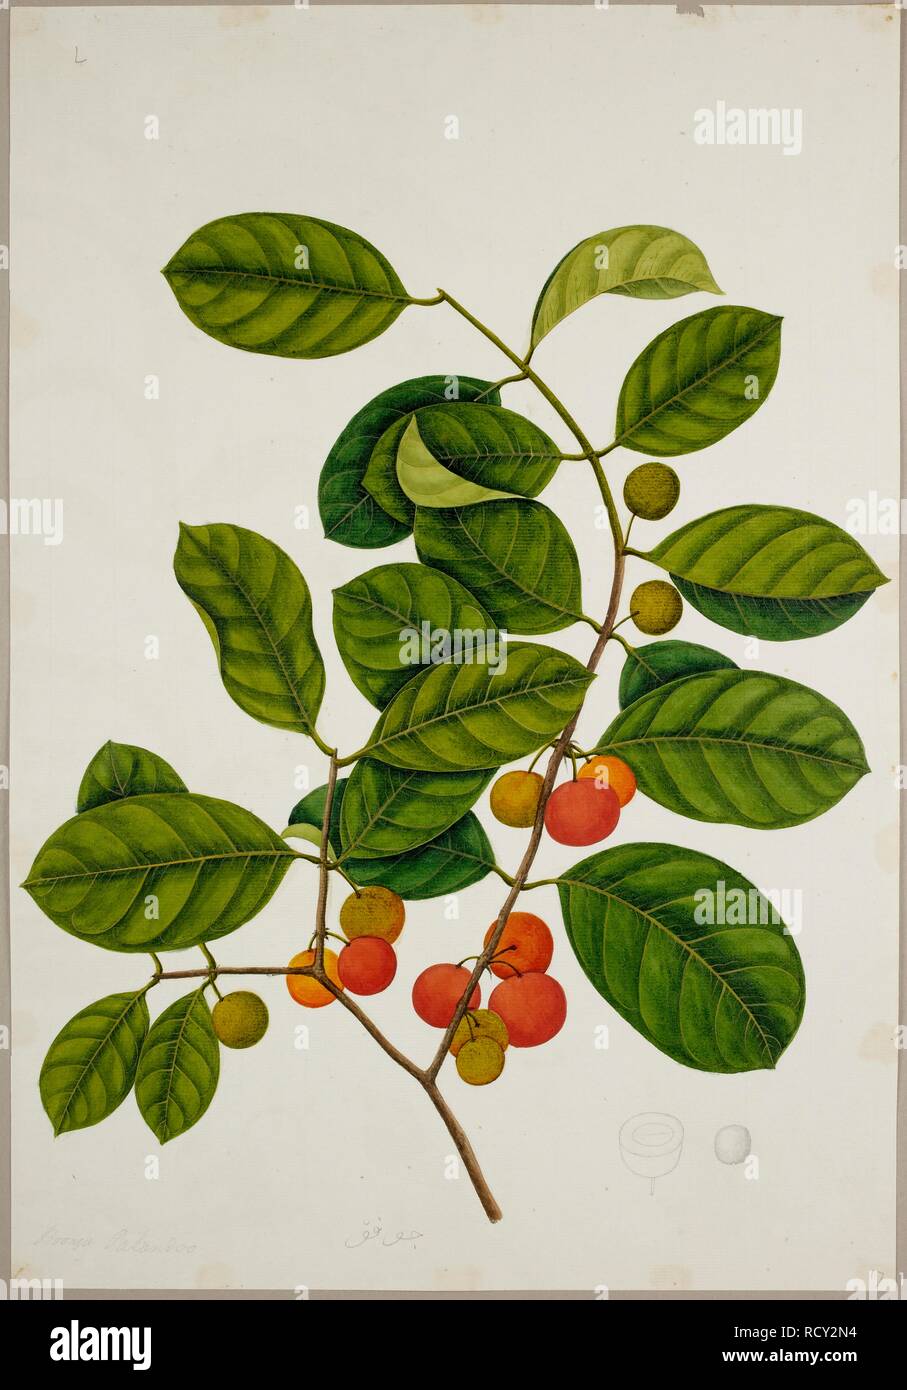 Salacia Chinensis. L. (Celastraceae). From an album of 40 drawings of plants made by Chinese artists at Bencoolen, Sumatra, for Sir Stamford Raffles. c.1824. Watercolour. Source: NHD 48/17. Stock Photo